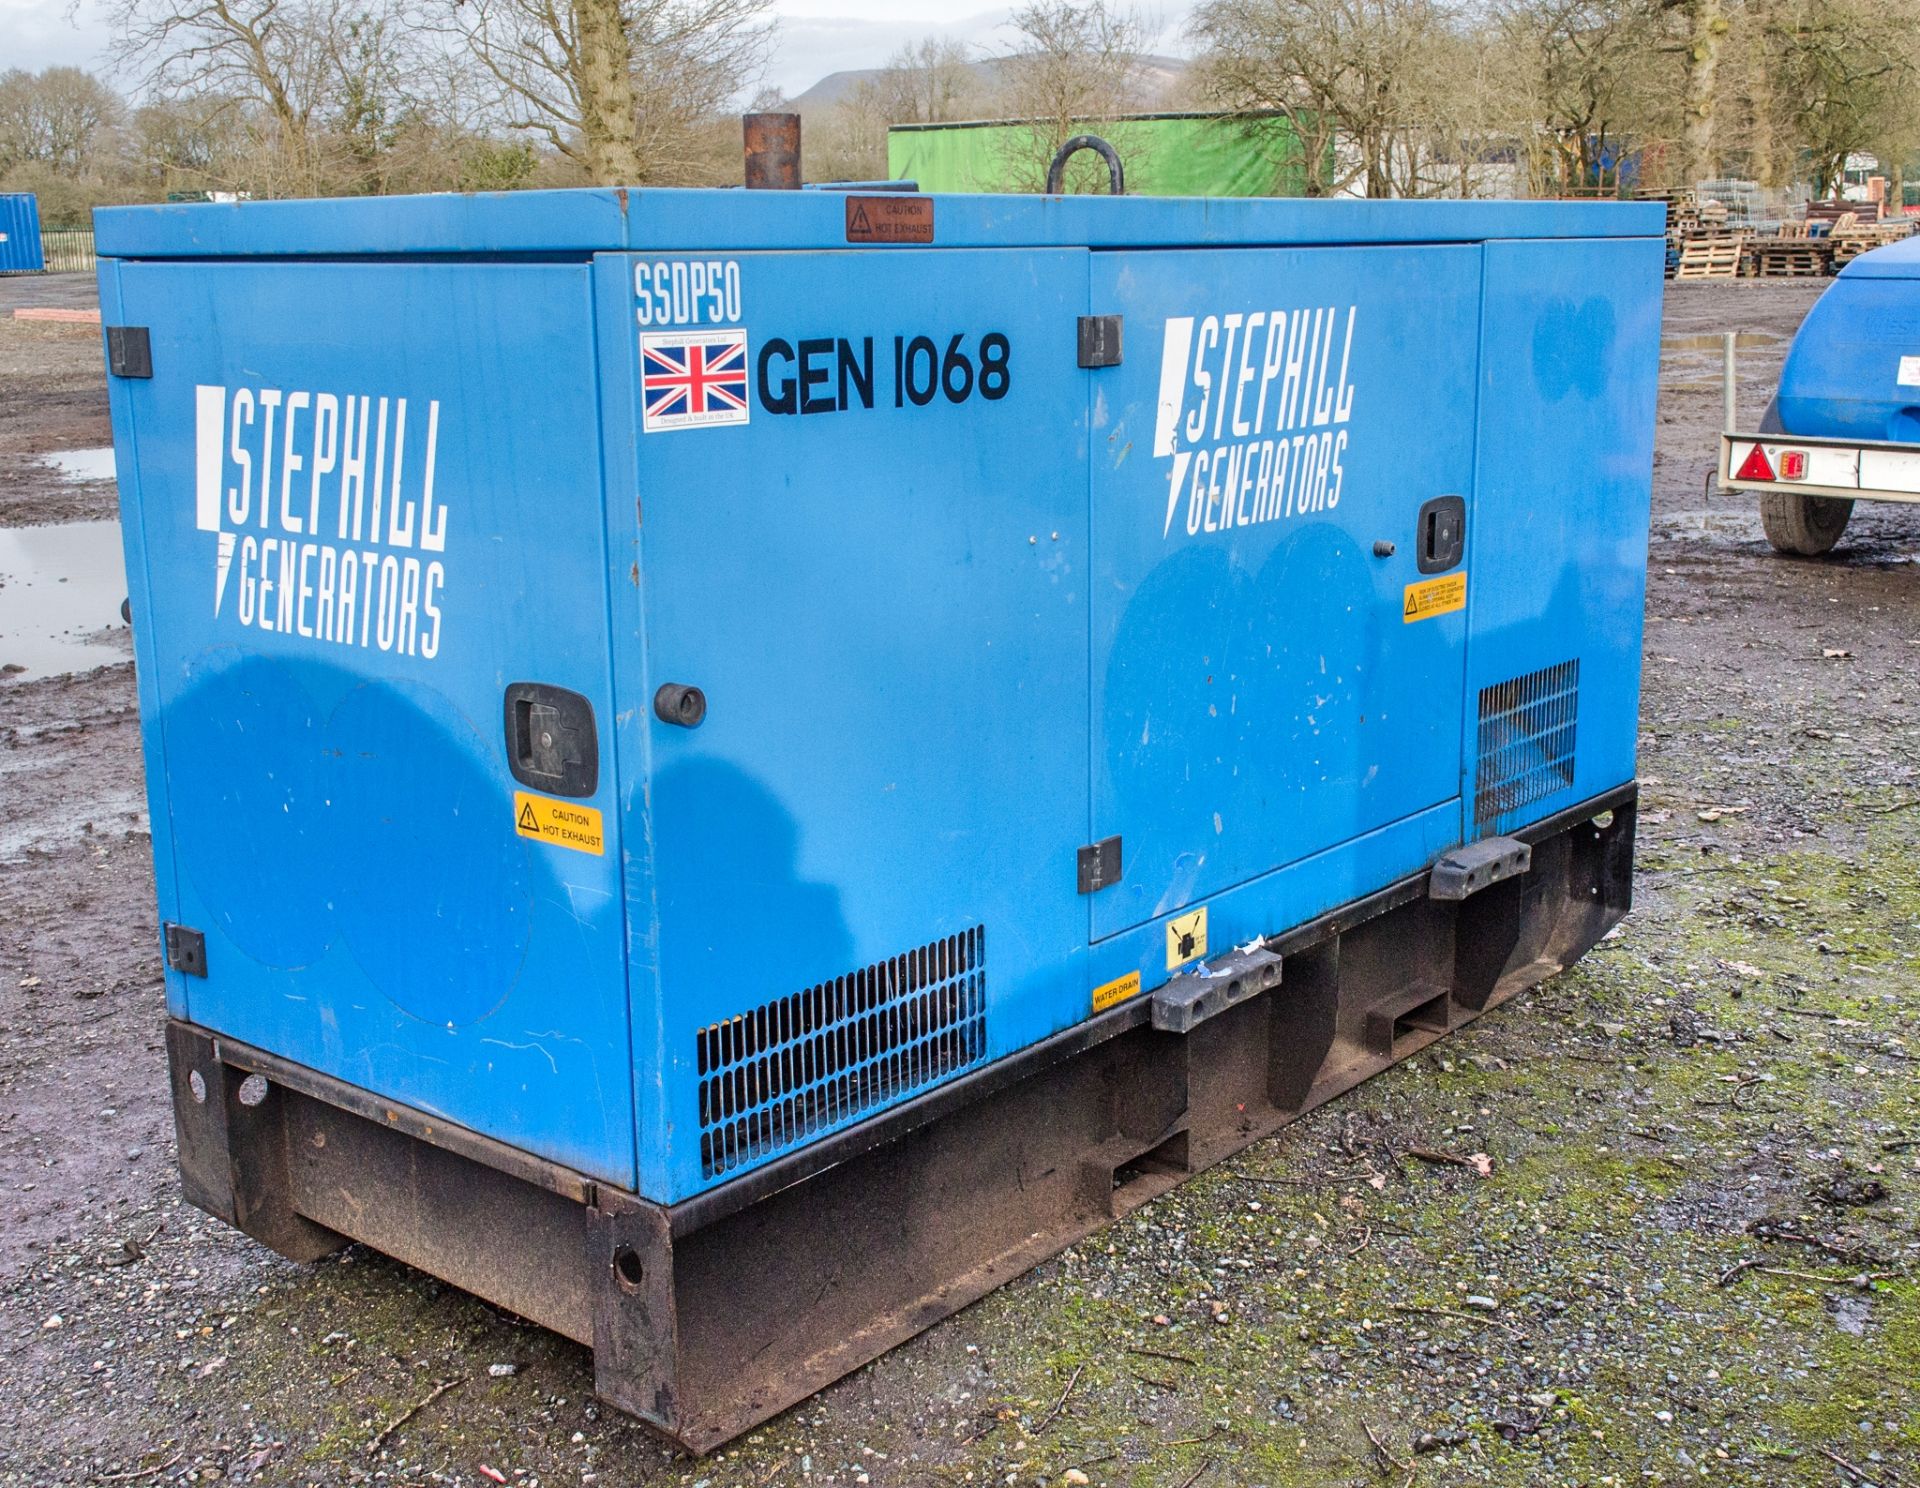 Stephill SSDP50 50 kva diesel driven generator Year: 2016 S/N: 603220 Recorded Hours: 8410 GEN1068 - Image 2 of 6